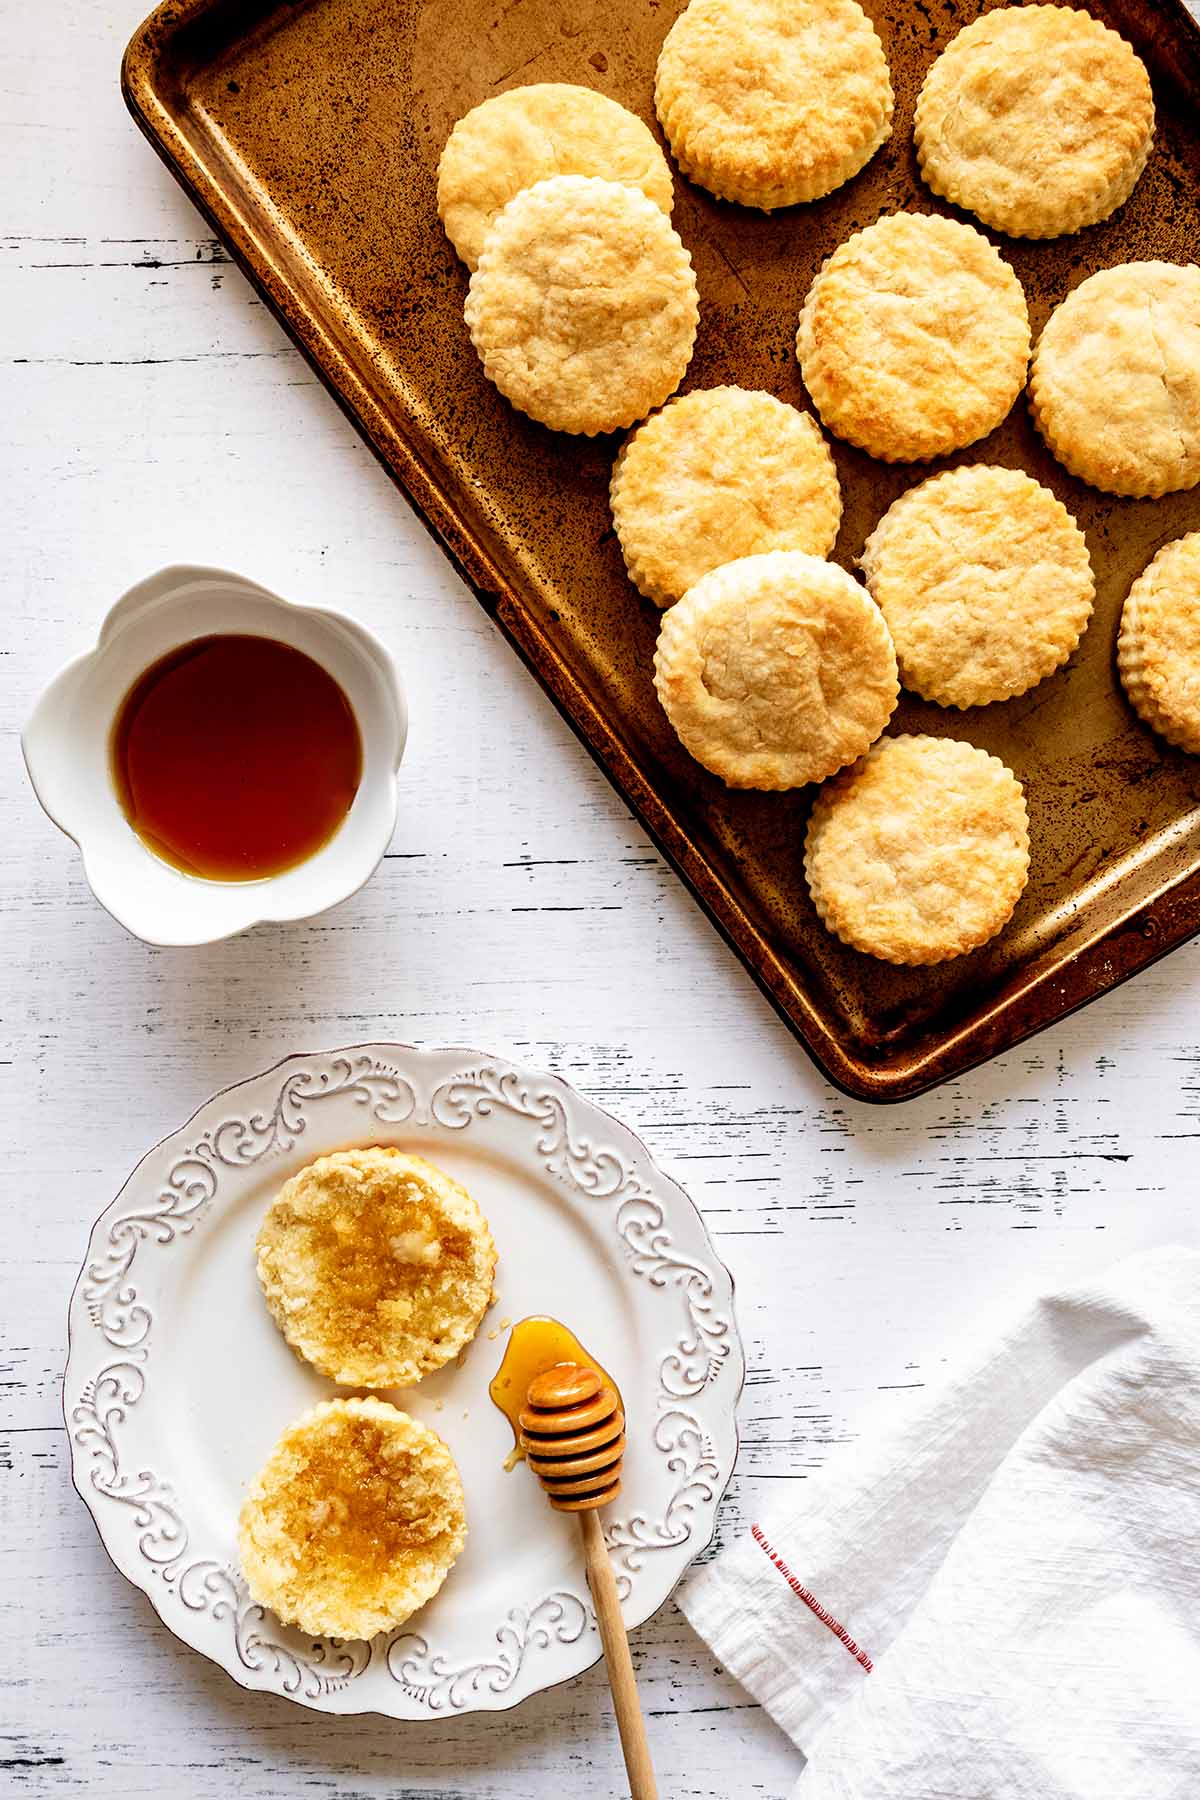 Overhead view of biscuits on a baking sheet and biscuits on a white plate with a bowl of honey